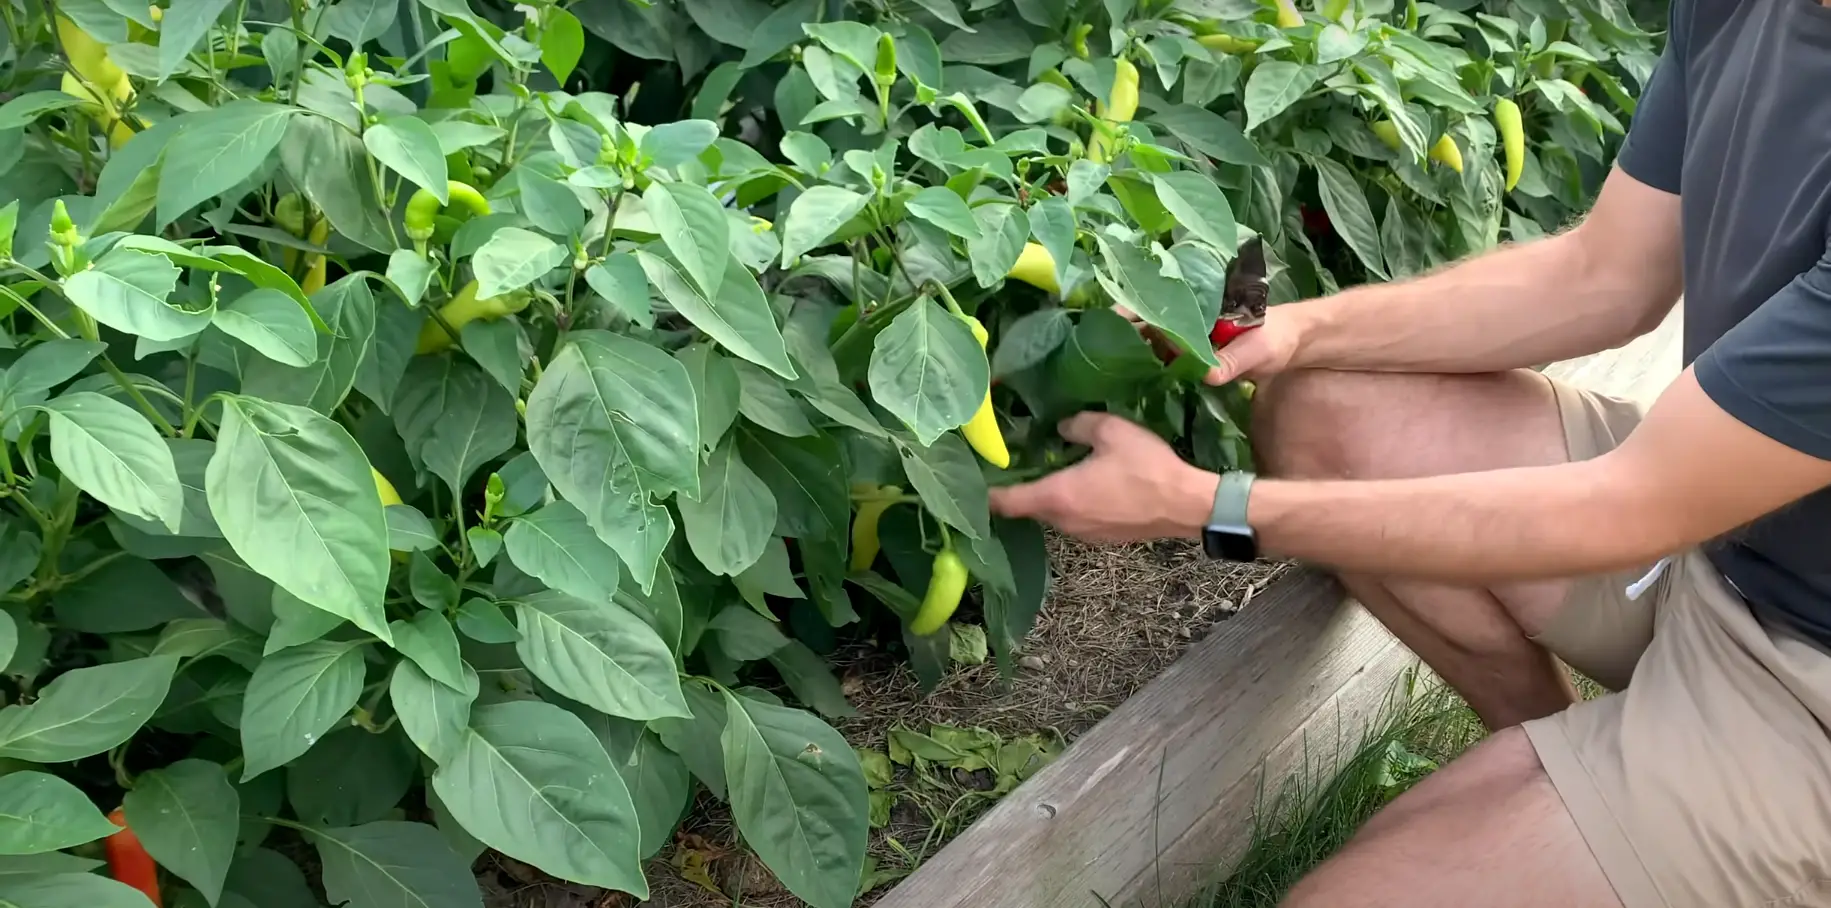 Can You Eat A Green Pepper That Turns Red?